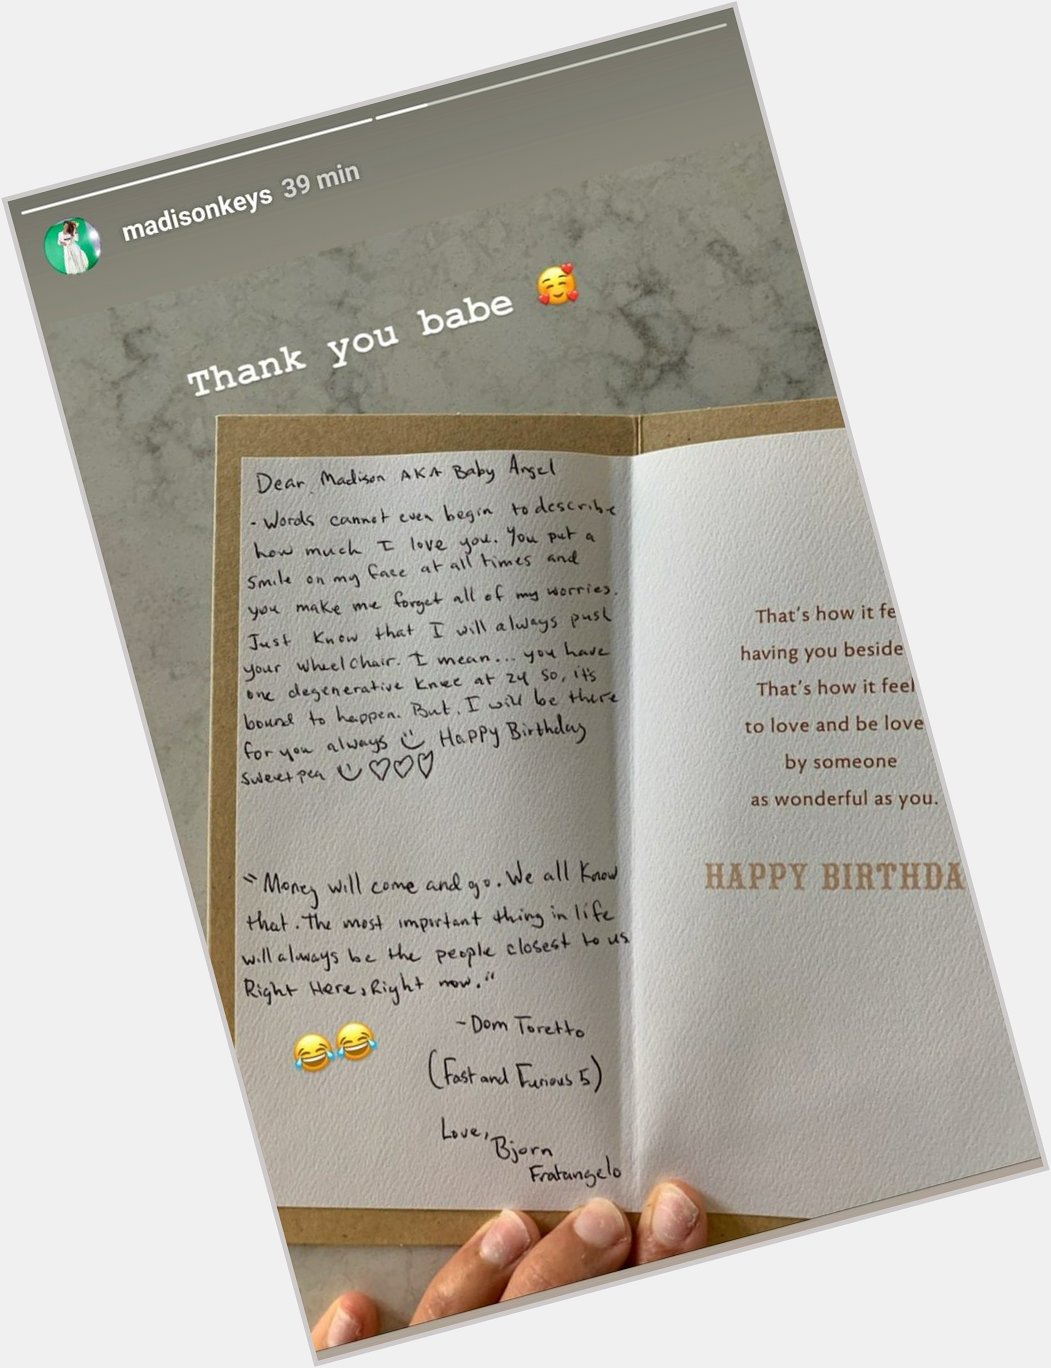 Such a cute birthday greeting from to Madison Keys. Happy birthday    